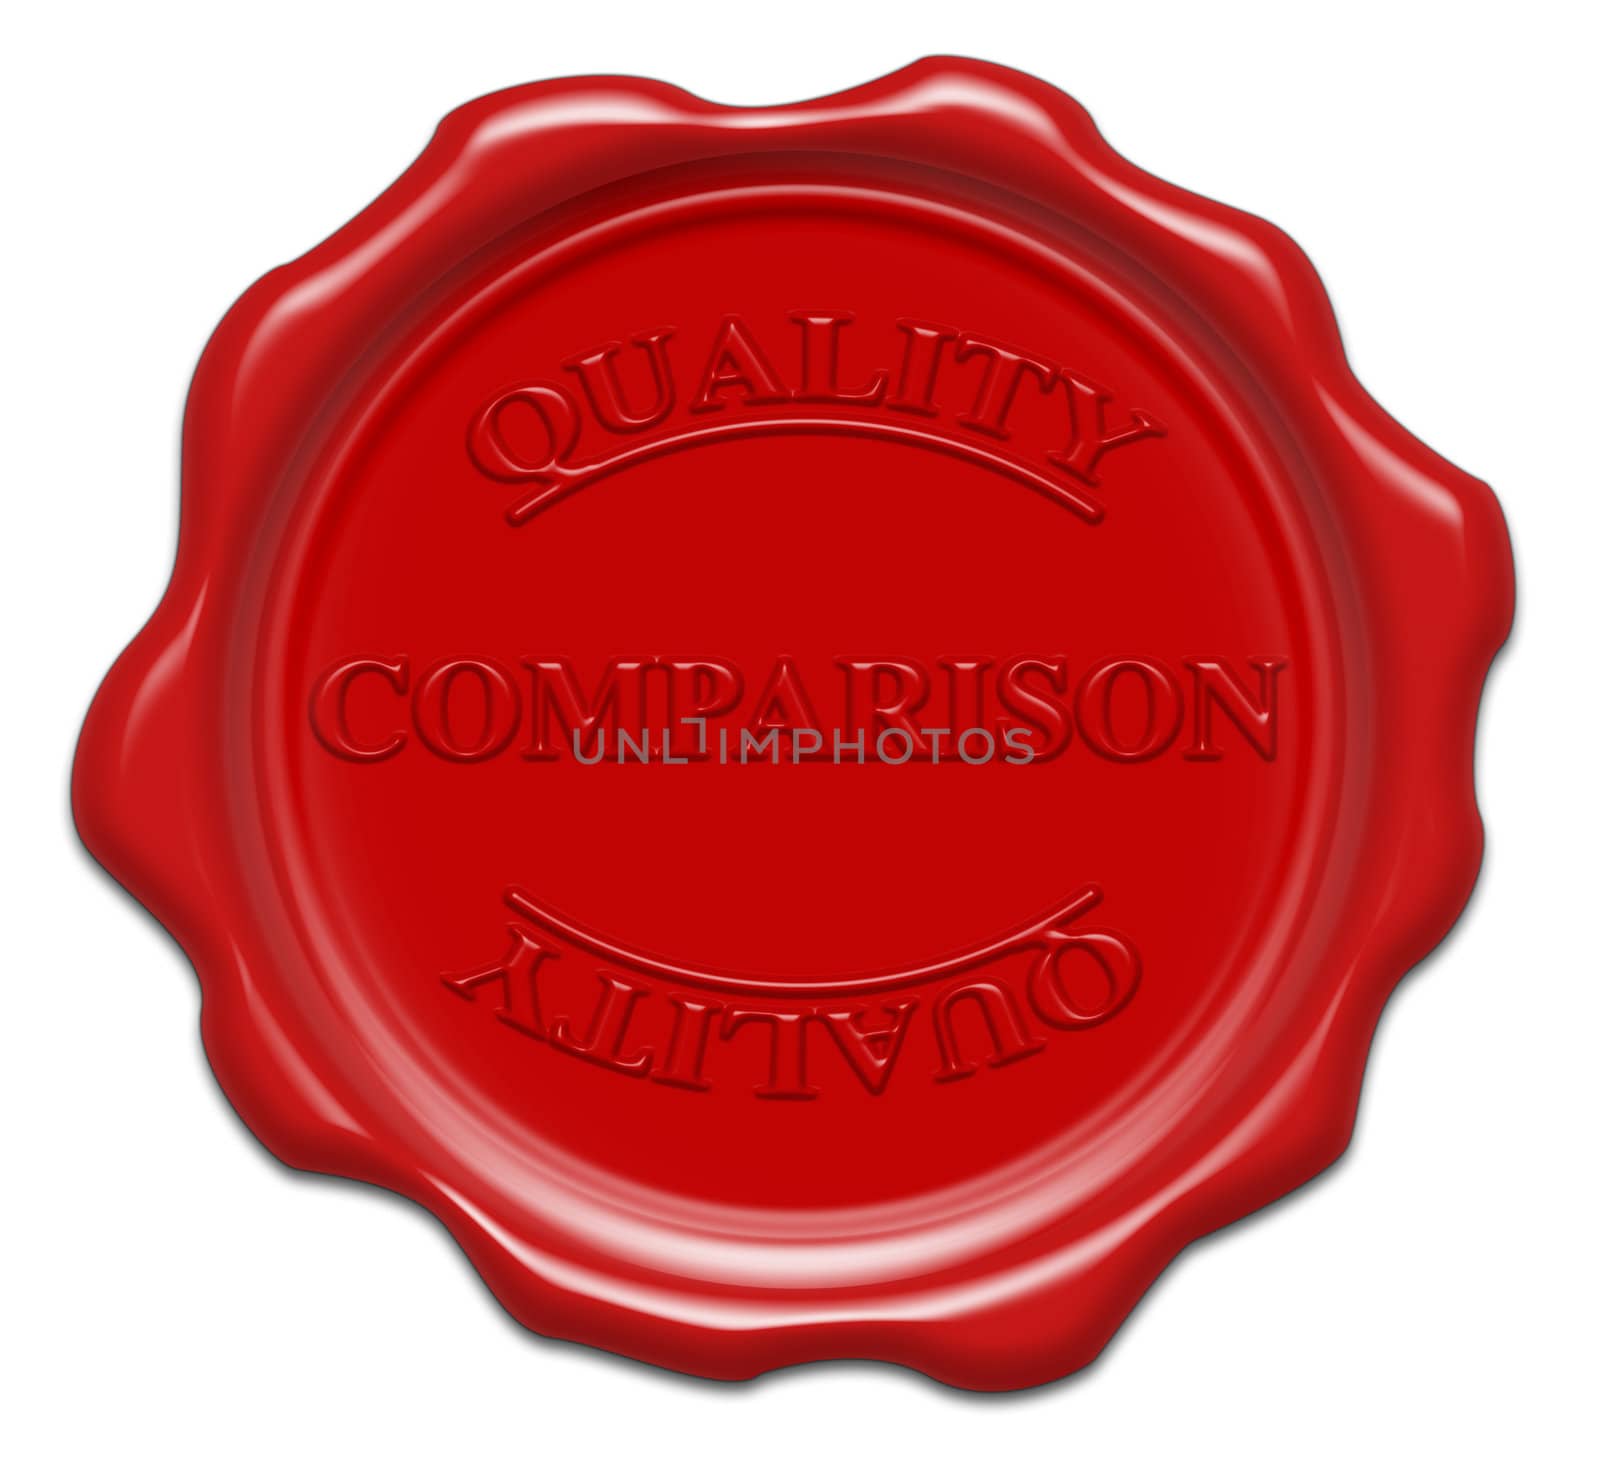 quality comparison - illustration red wax seal isolated on white background with word : comparison